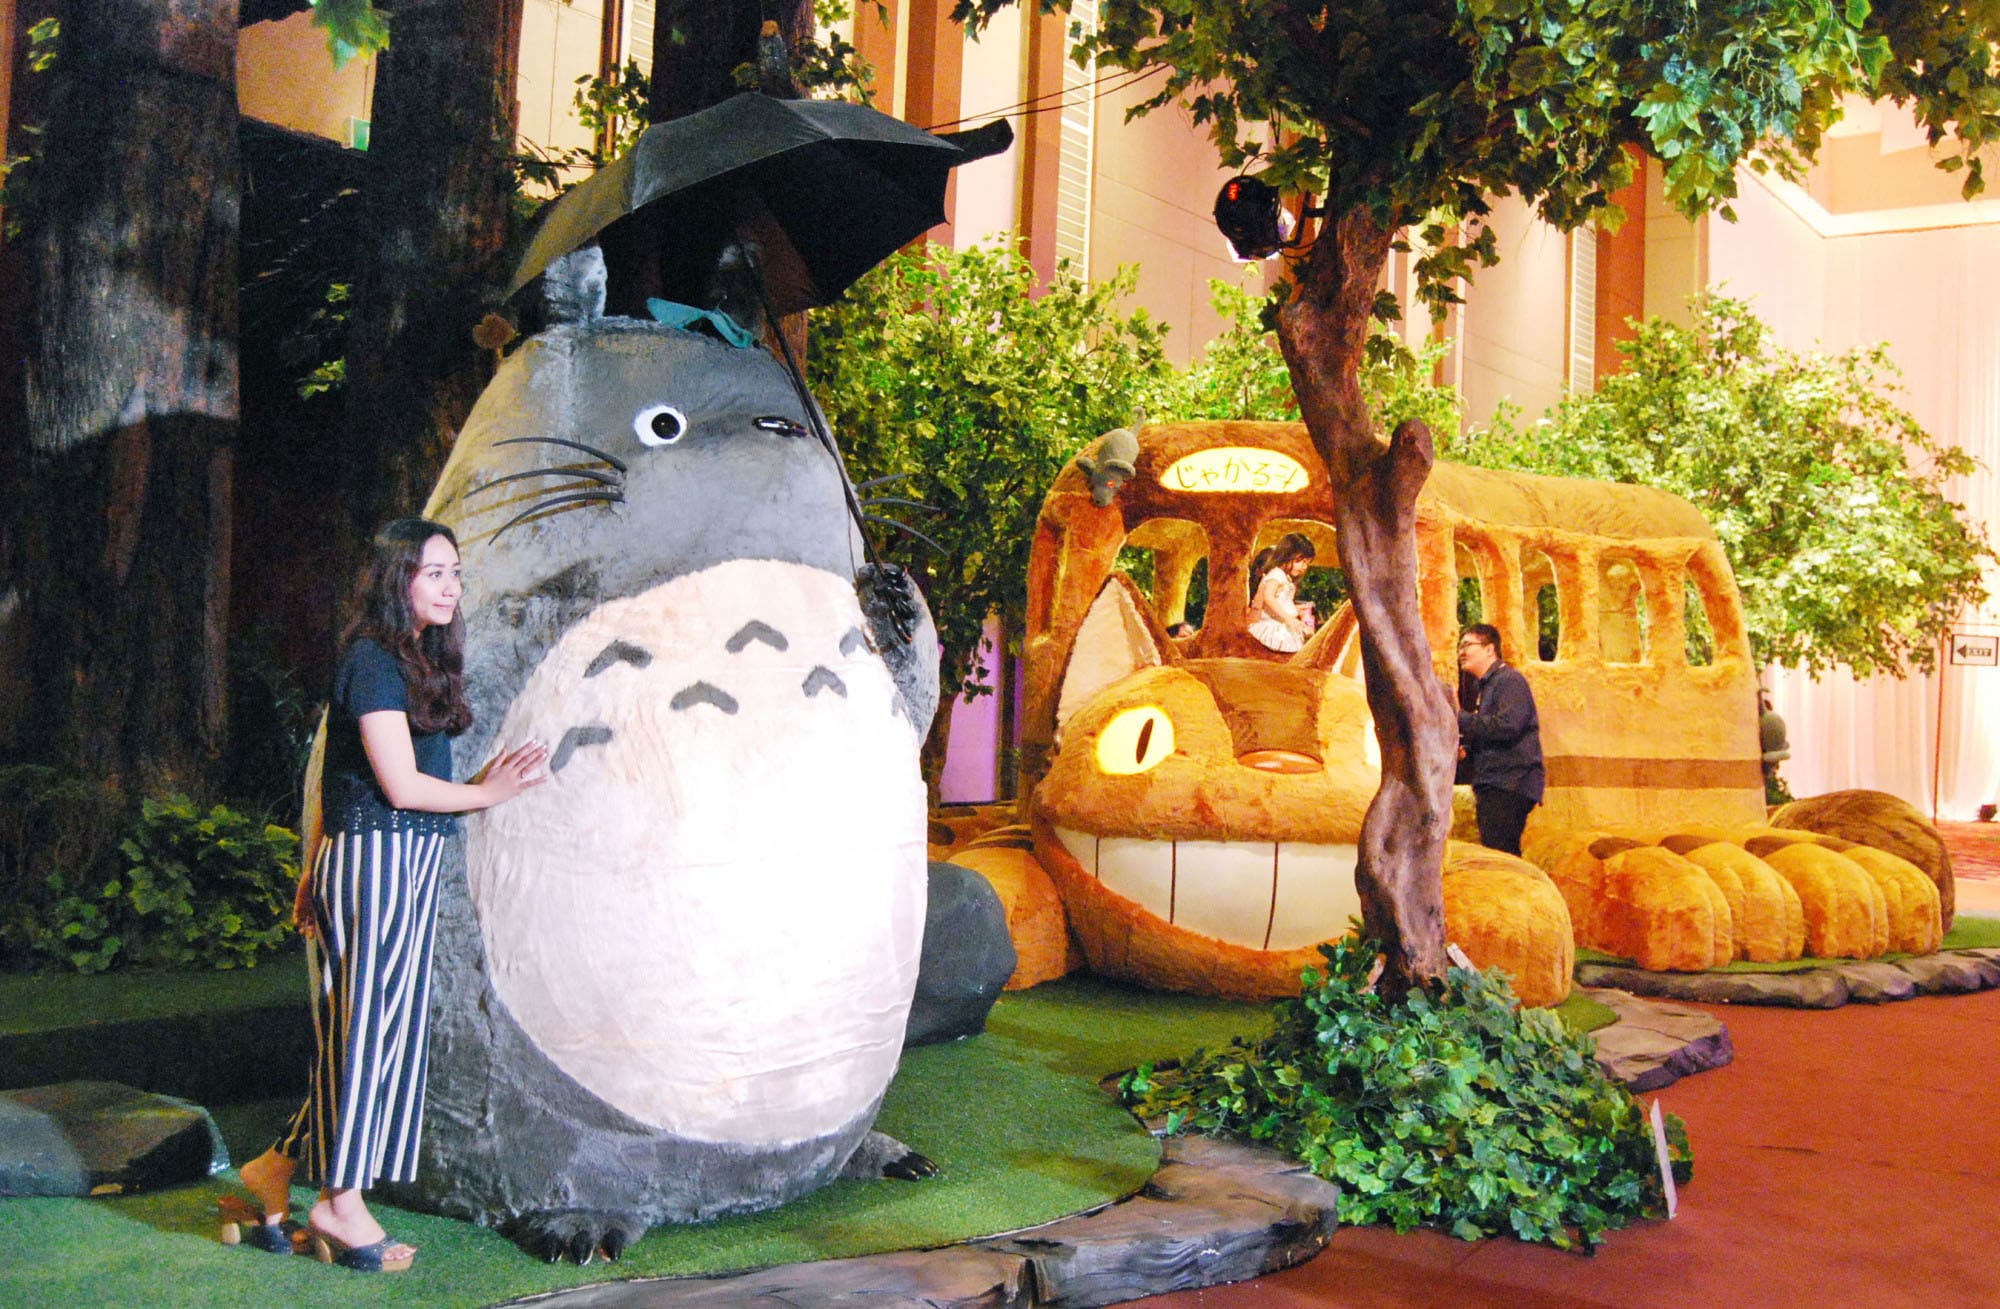 Opening Date Revealed for Japan's Studio Ghibli Theme Park